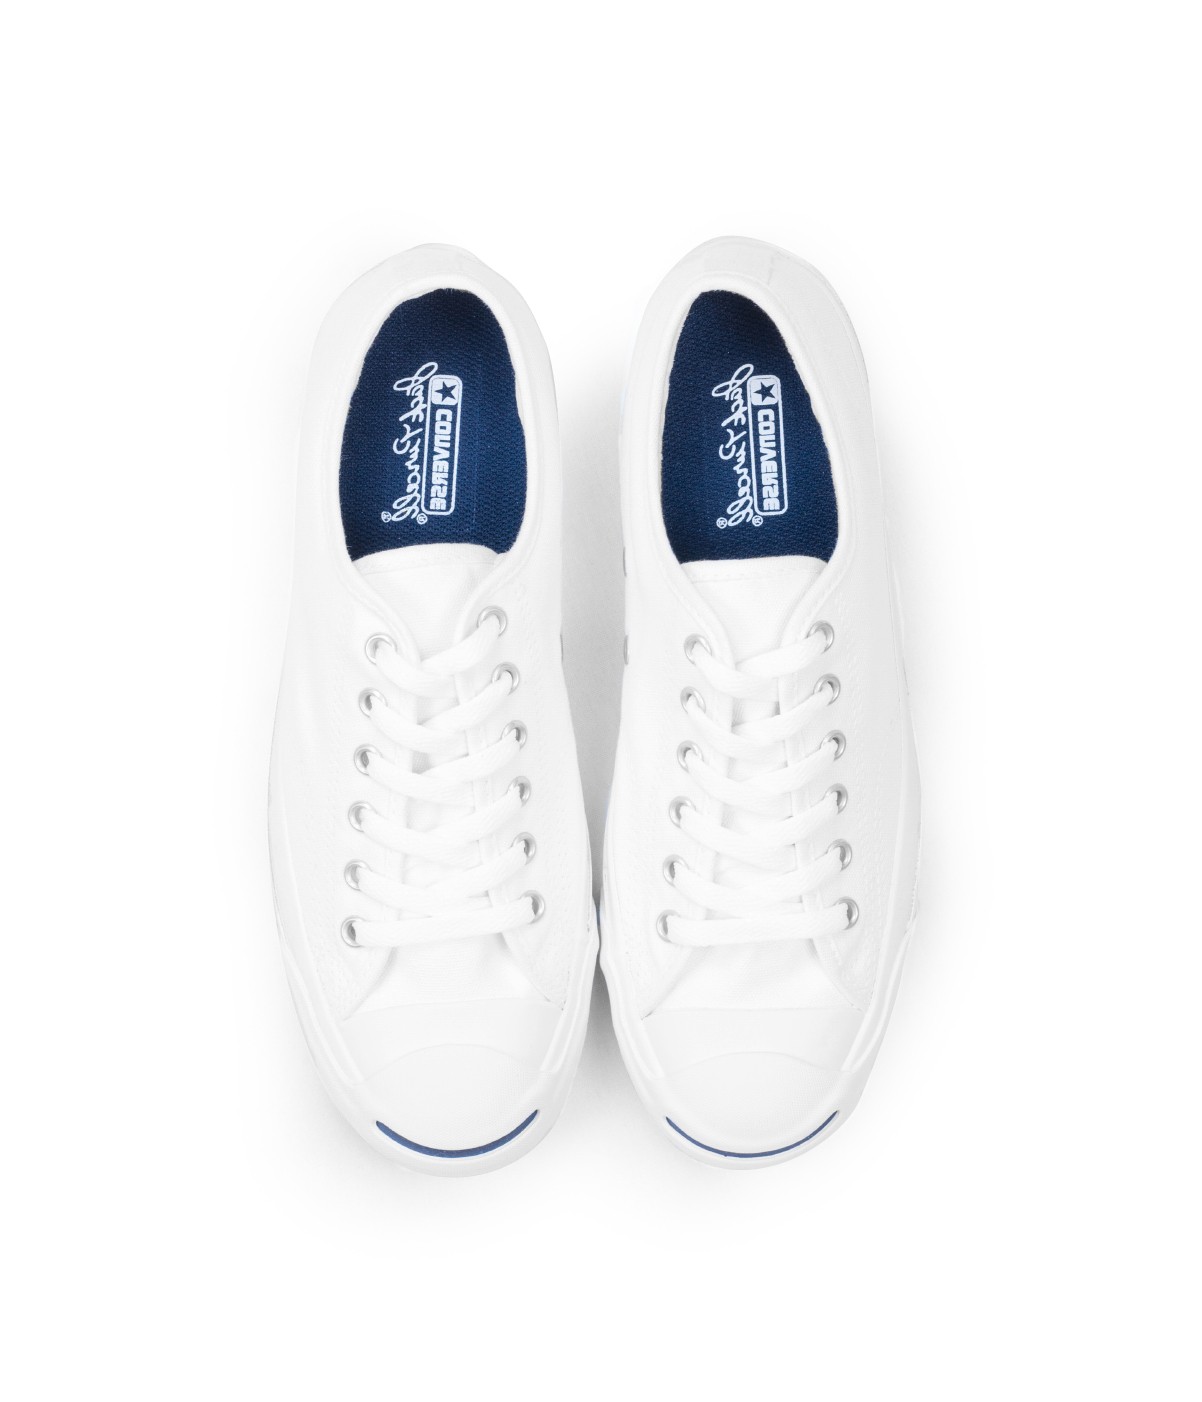 converse jack purcell jp